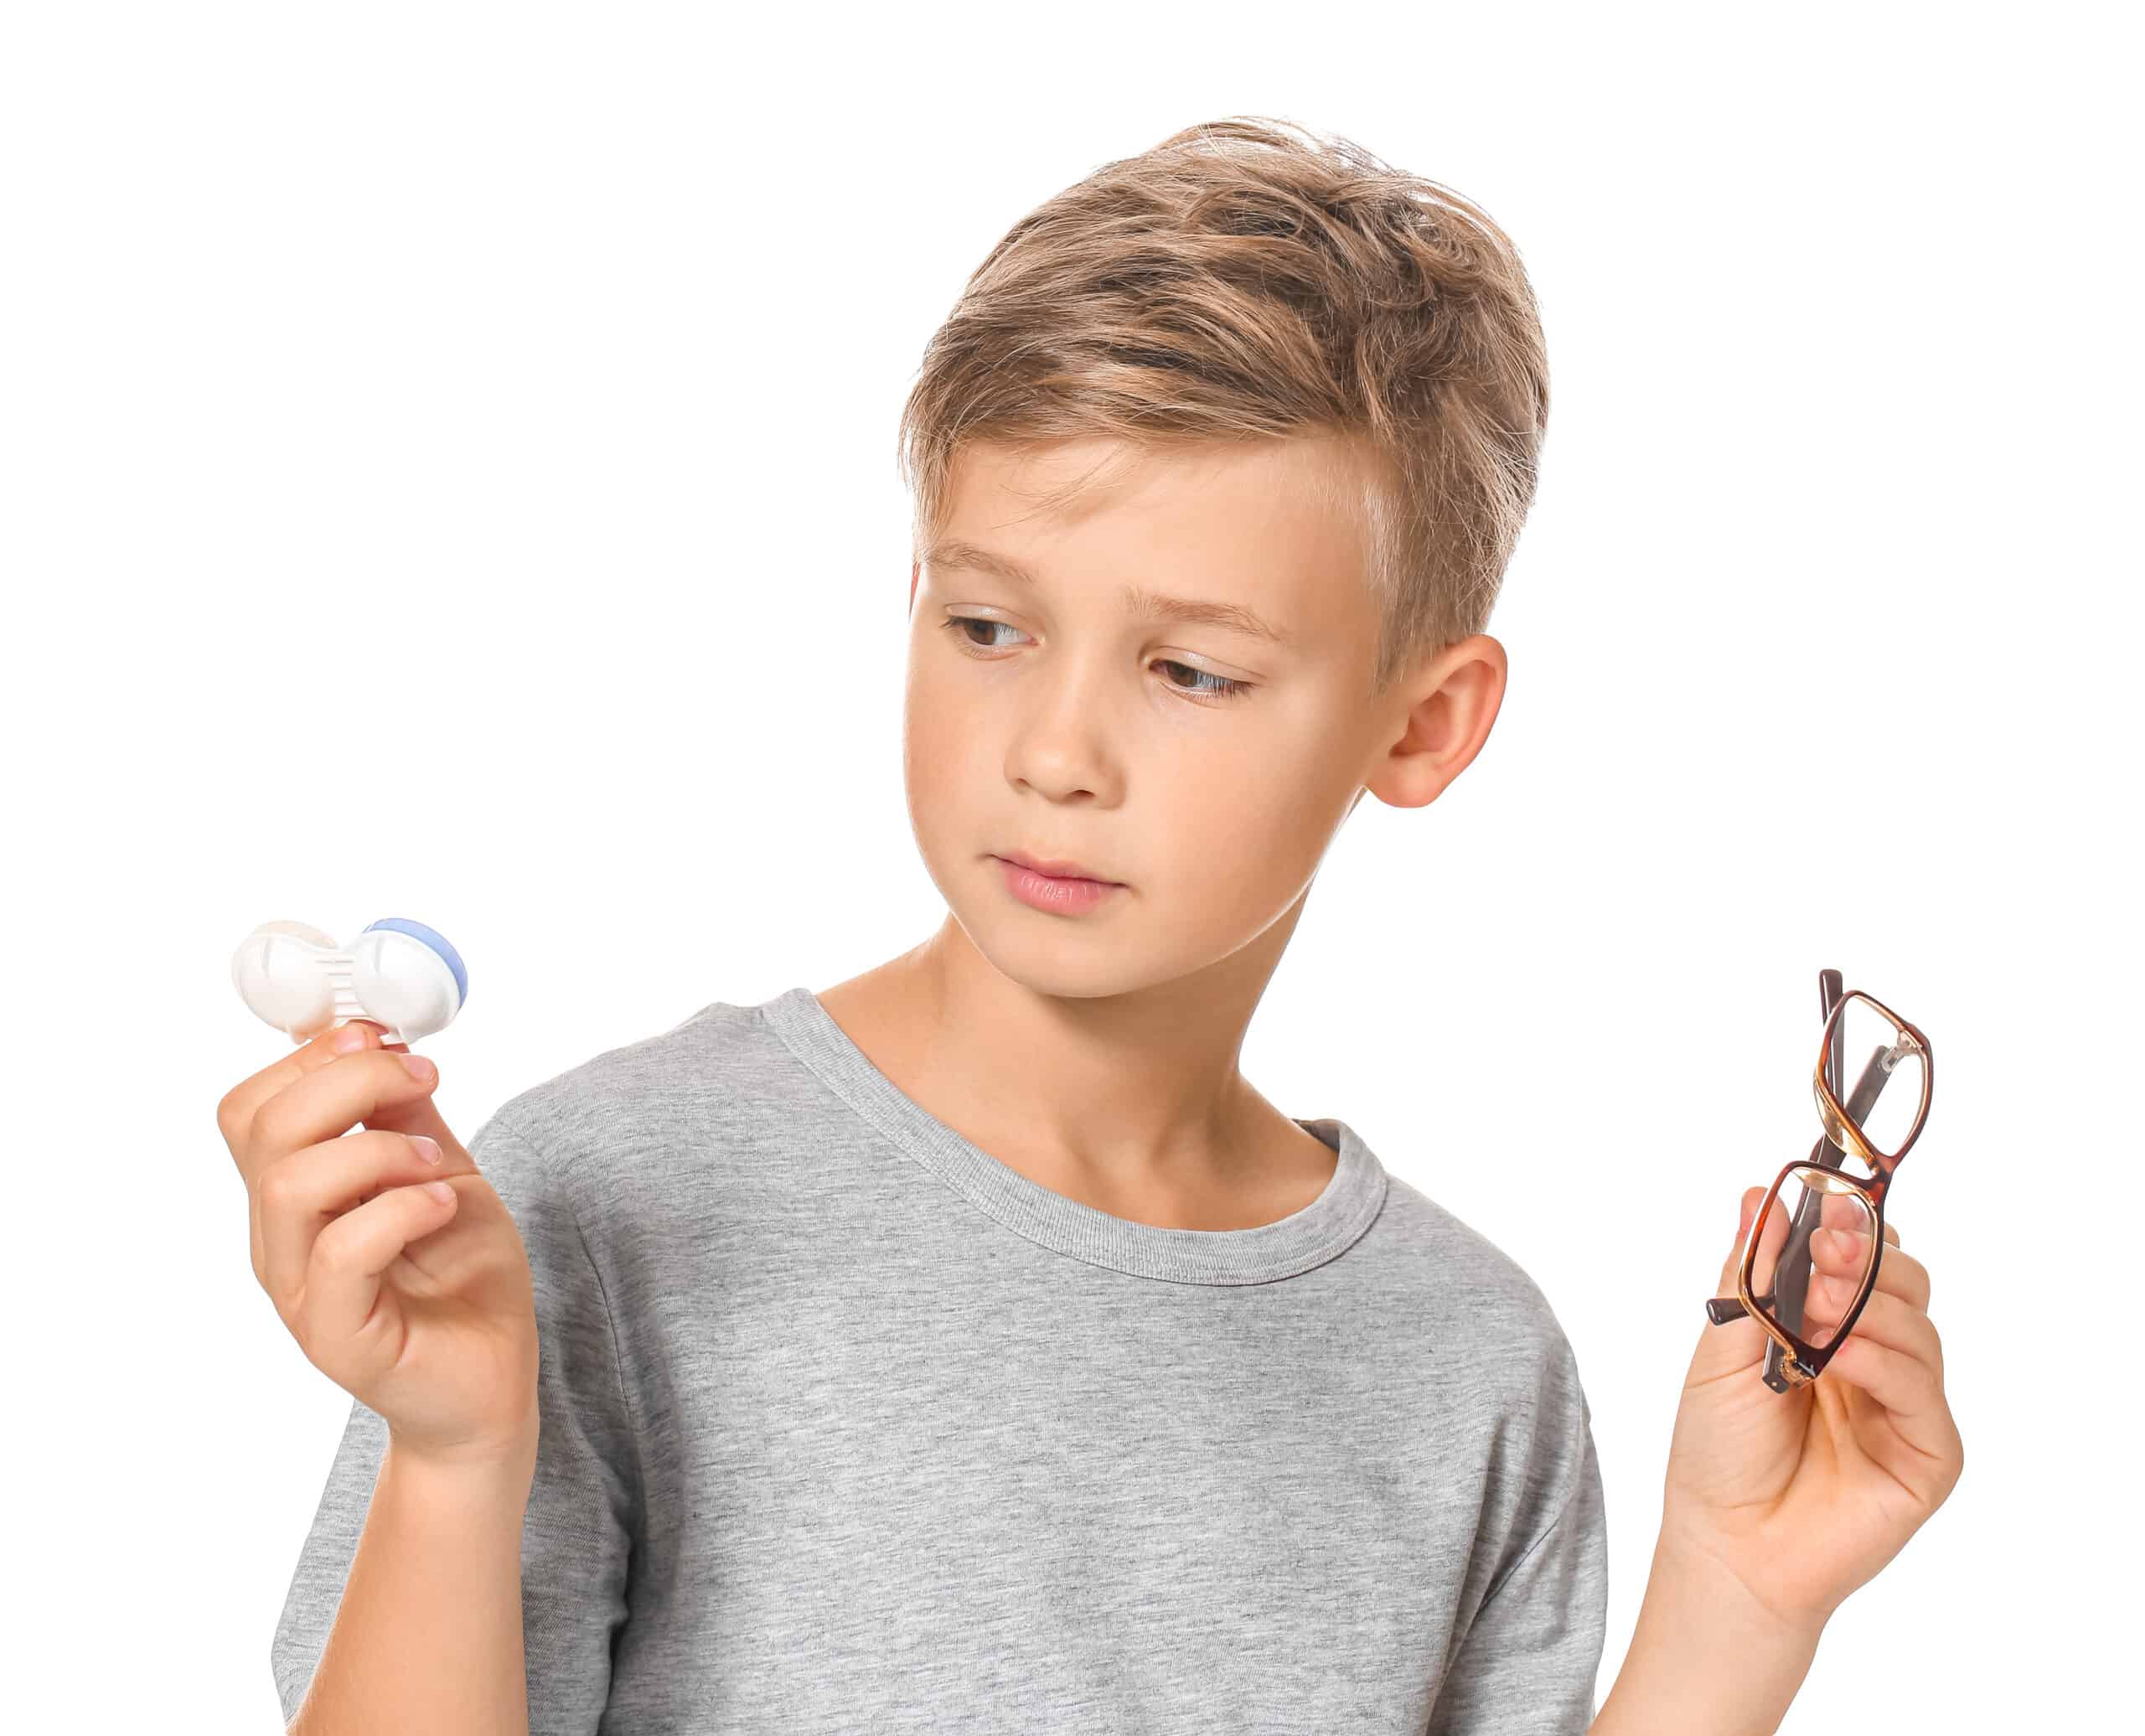 Is Your Child Ready For Contact Lenses?